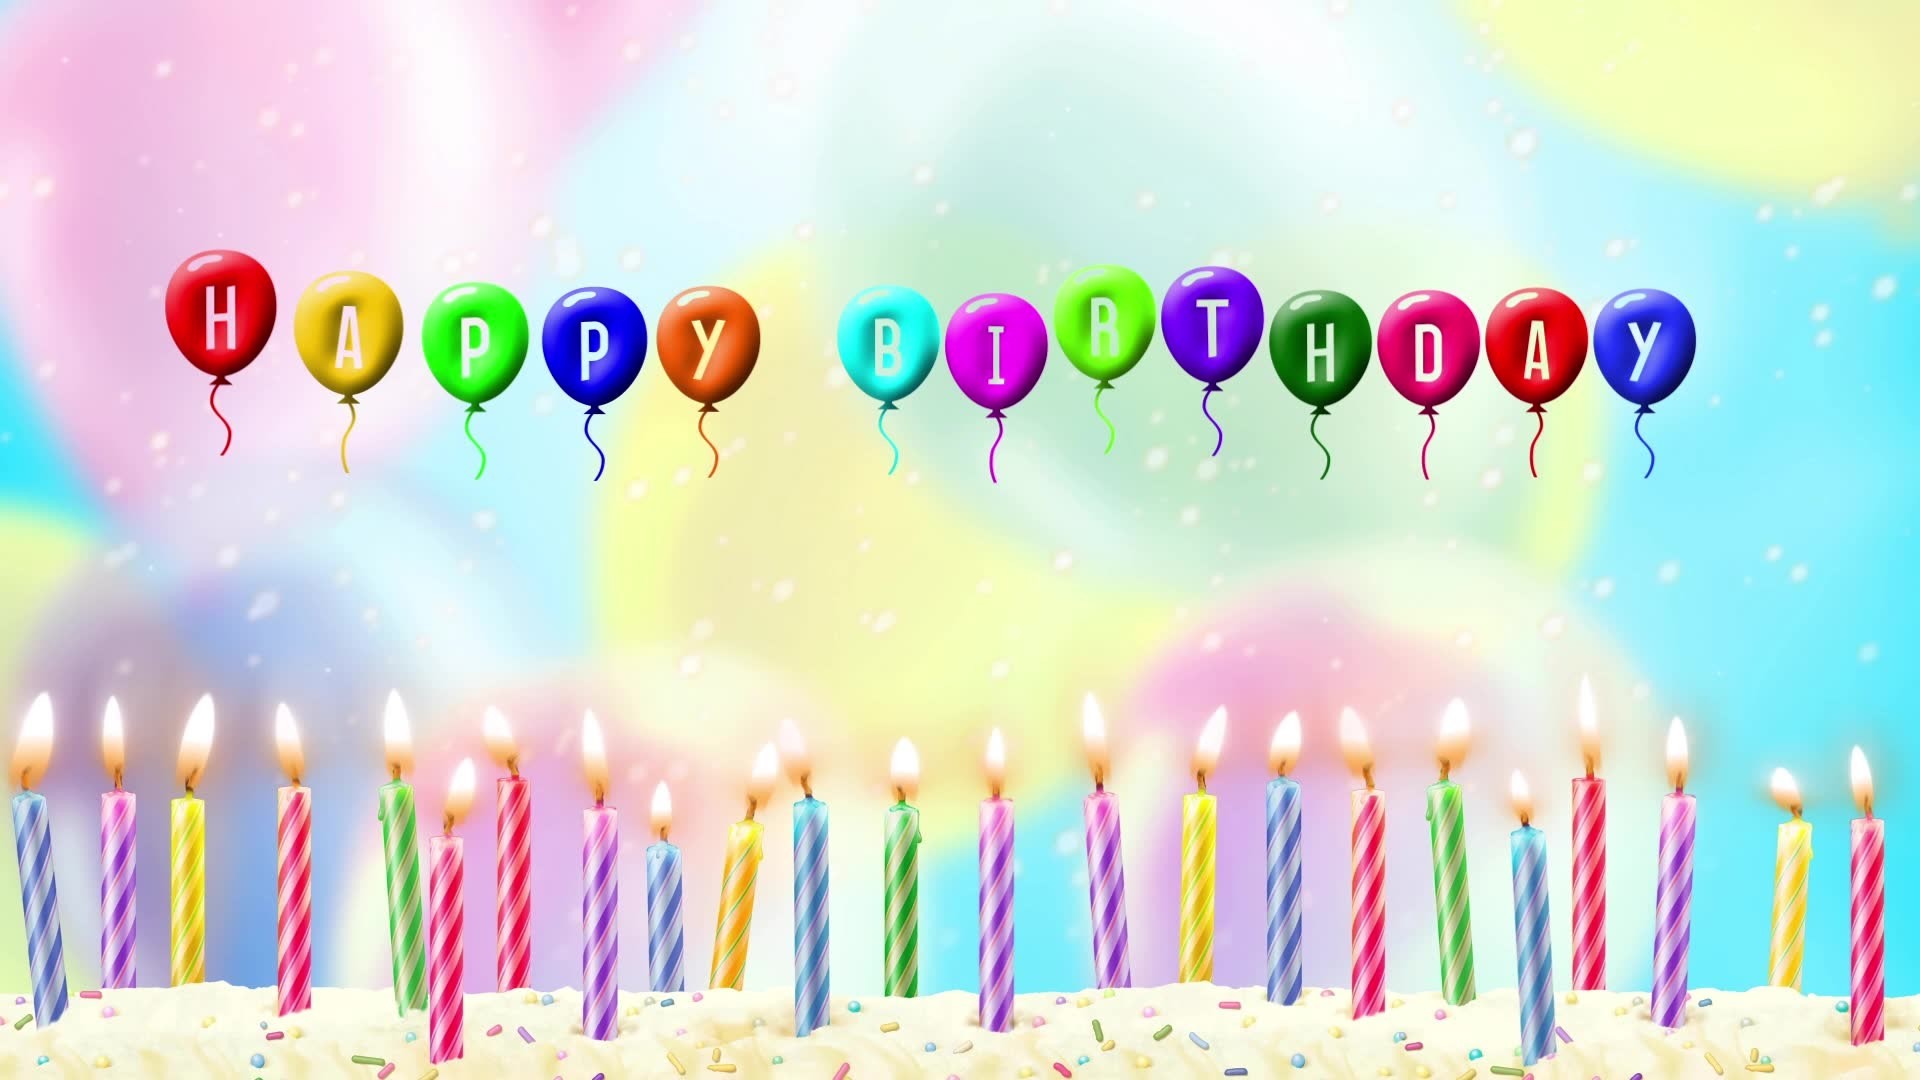 1920x1080 ... happy birthday wallpapers hd images live hd wallpaper hq ...